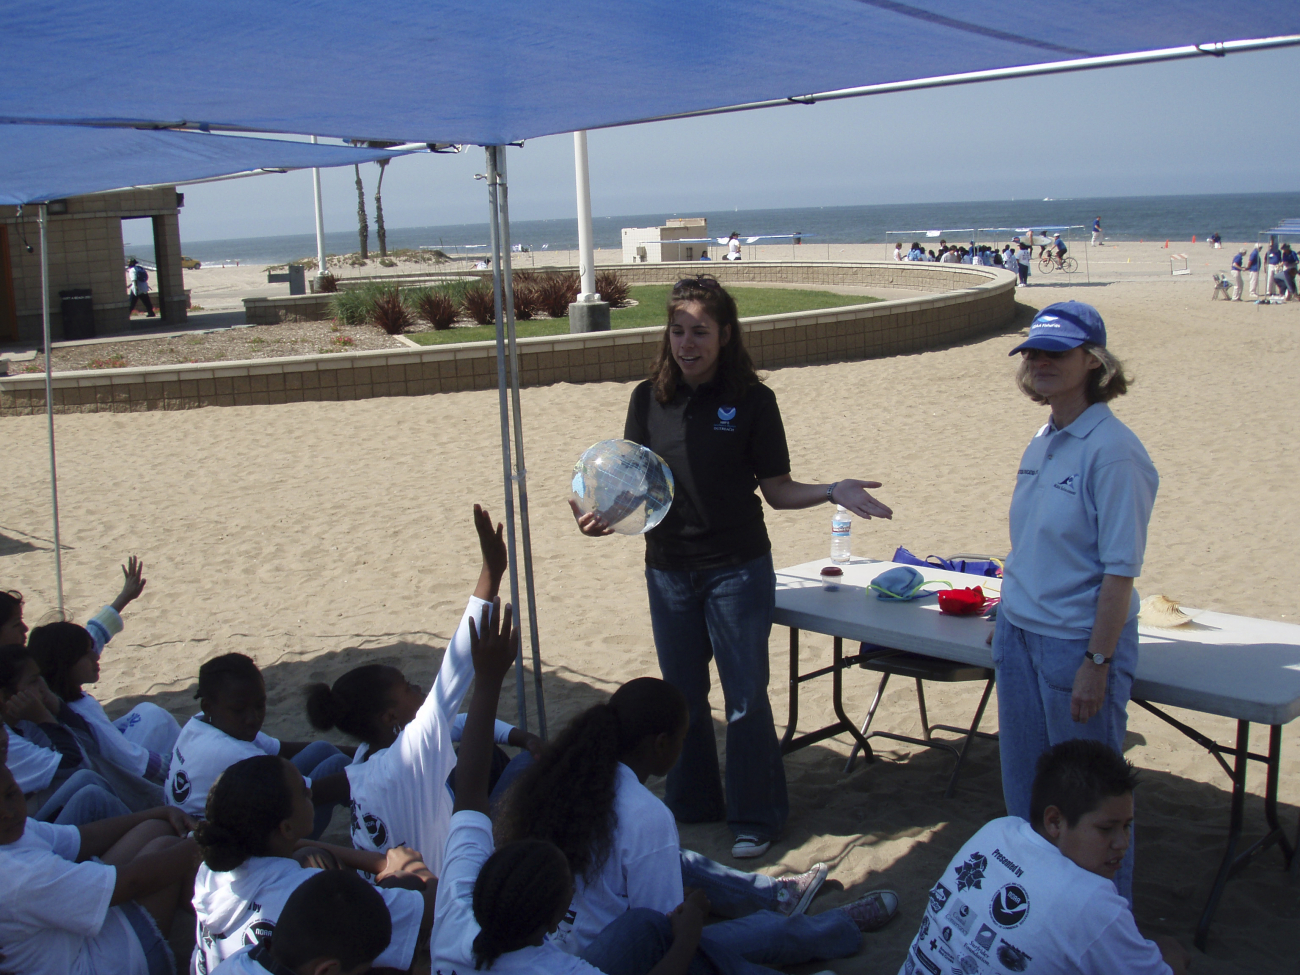 NOAA celebrated June 8th as World Ocean Day and California's first Thank YouOcean Day by bringing 1,200 4th and 5th graders to Dockweiler Beach